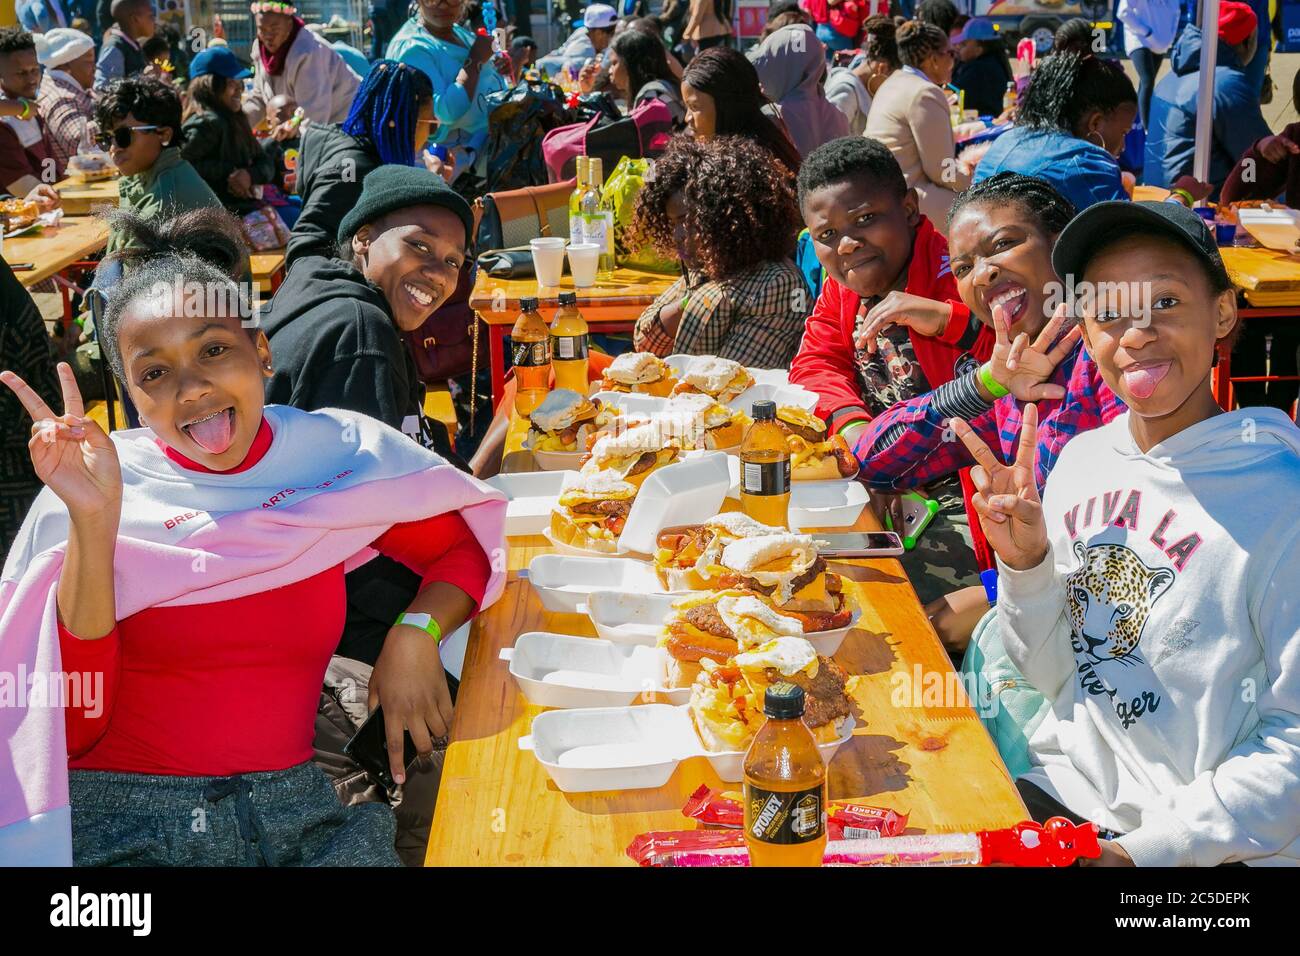 Soweto, South Africa - September 8, 2018: Diverse African people at a bread based street food outdoor festival Stock Photo